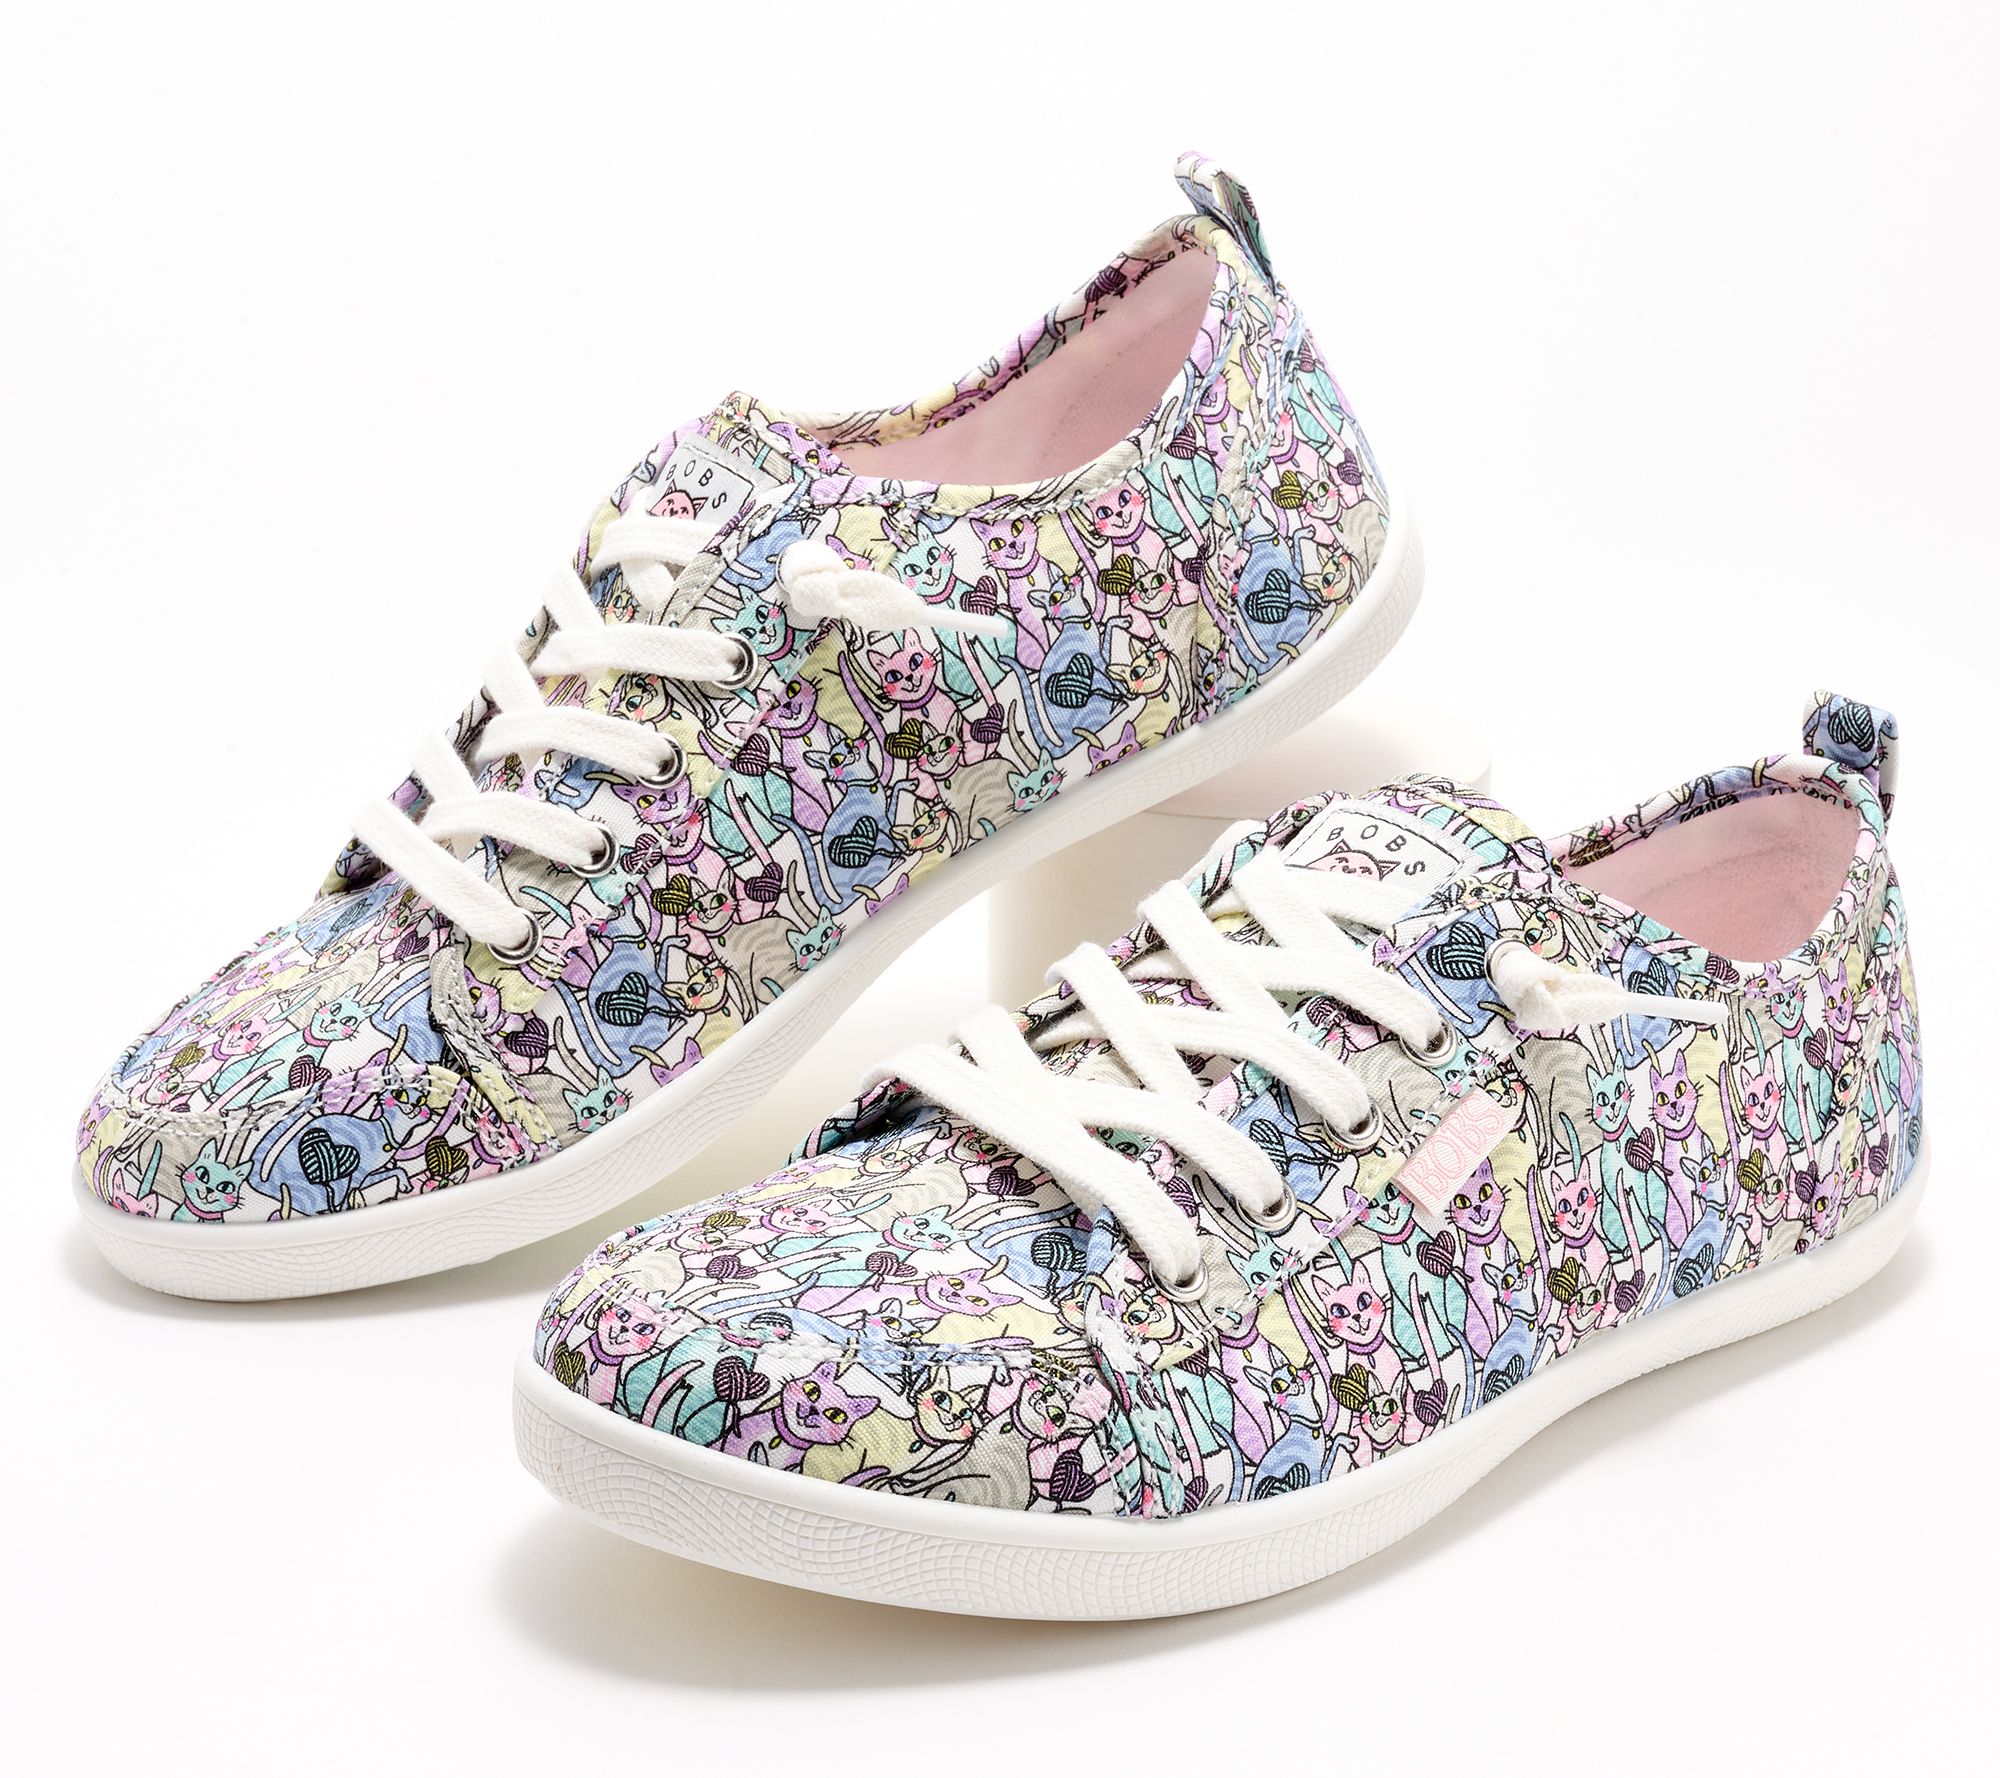 Skechers BOBS B Cute Washable Canvas Slip-On Sneakers - Cat QVC.com